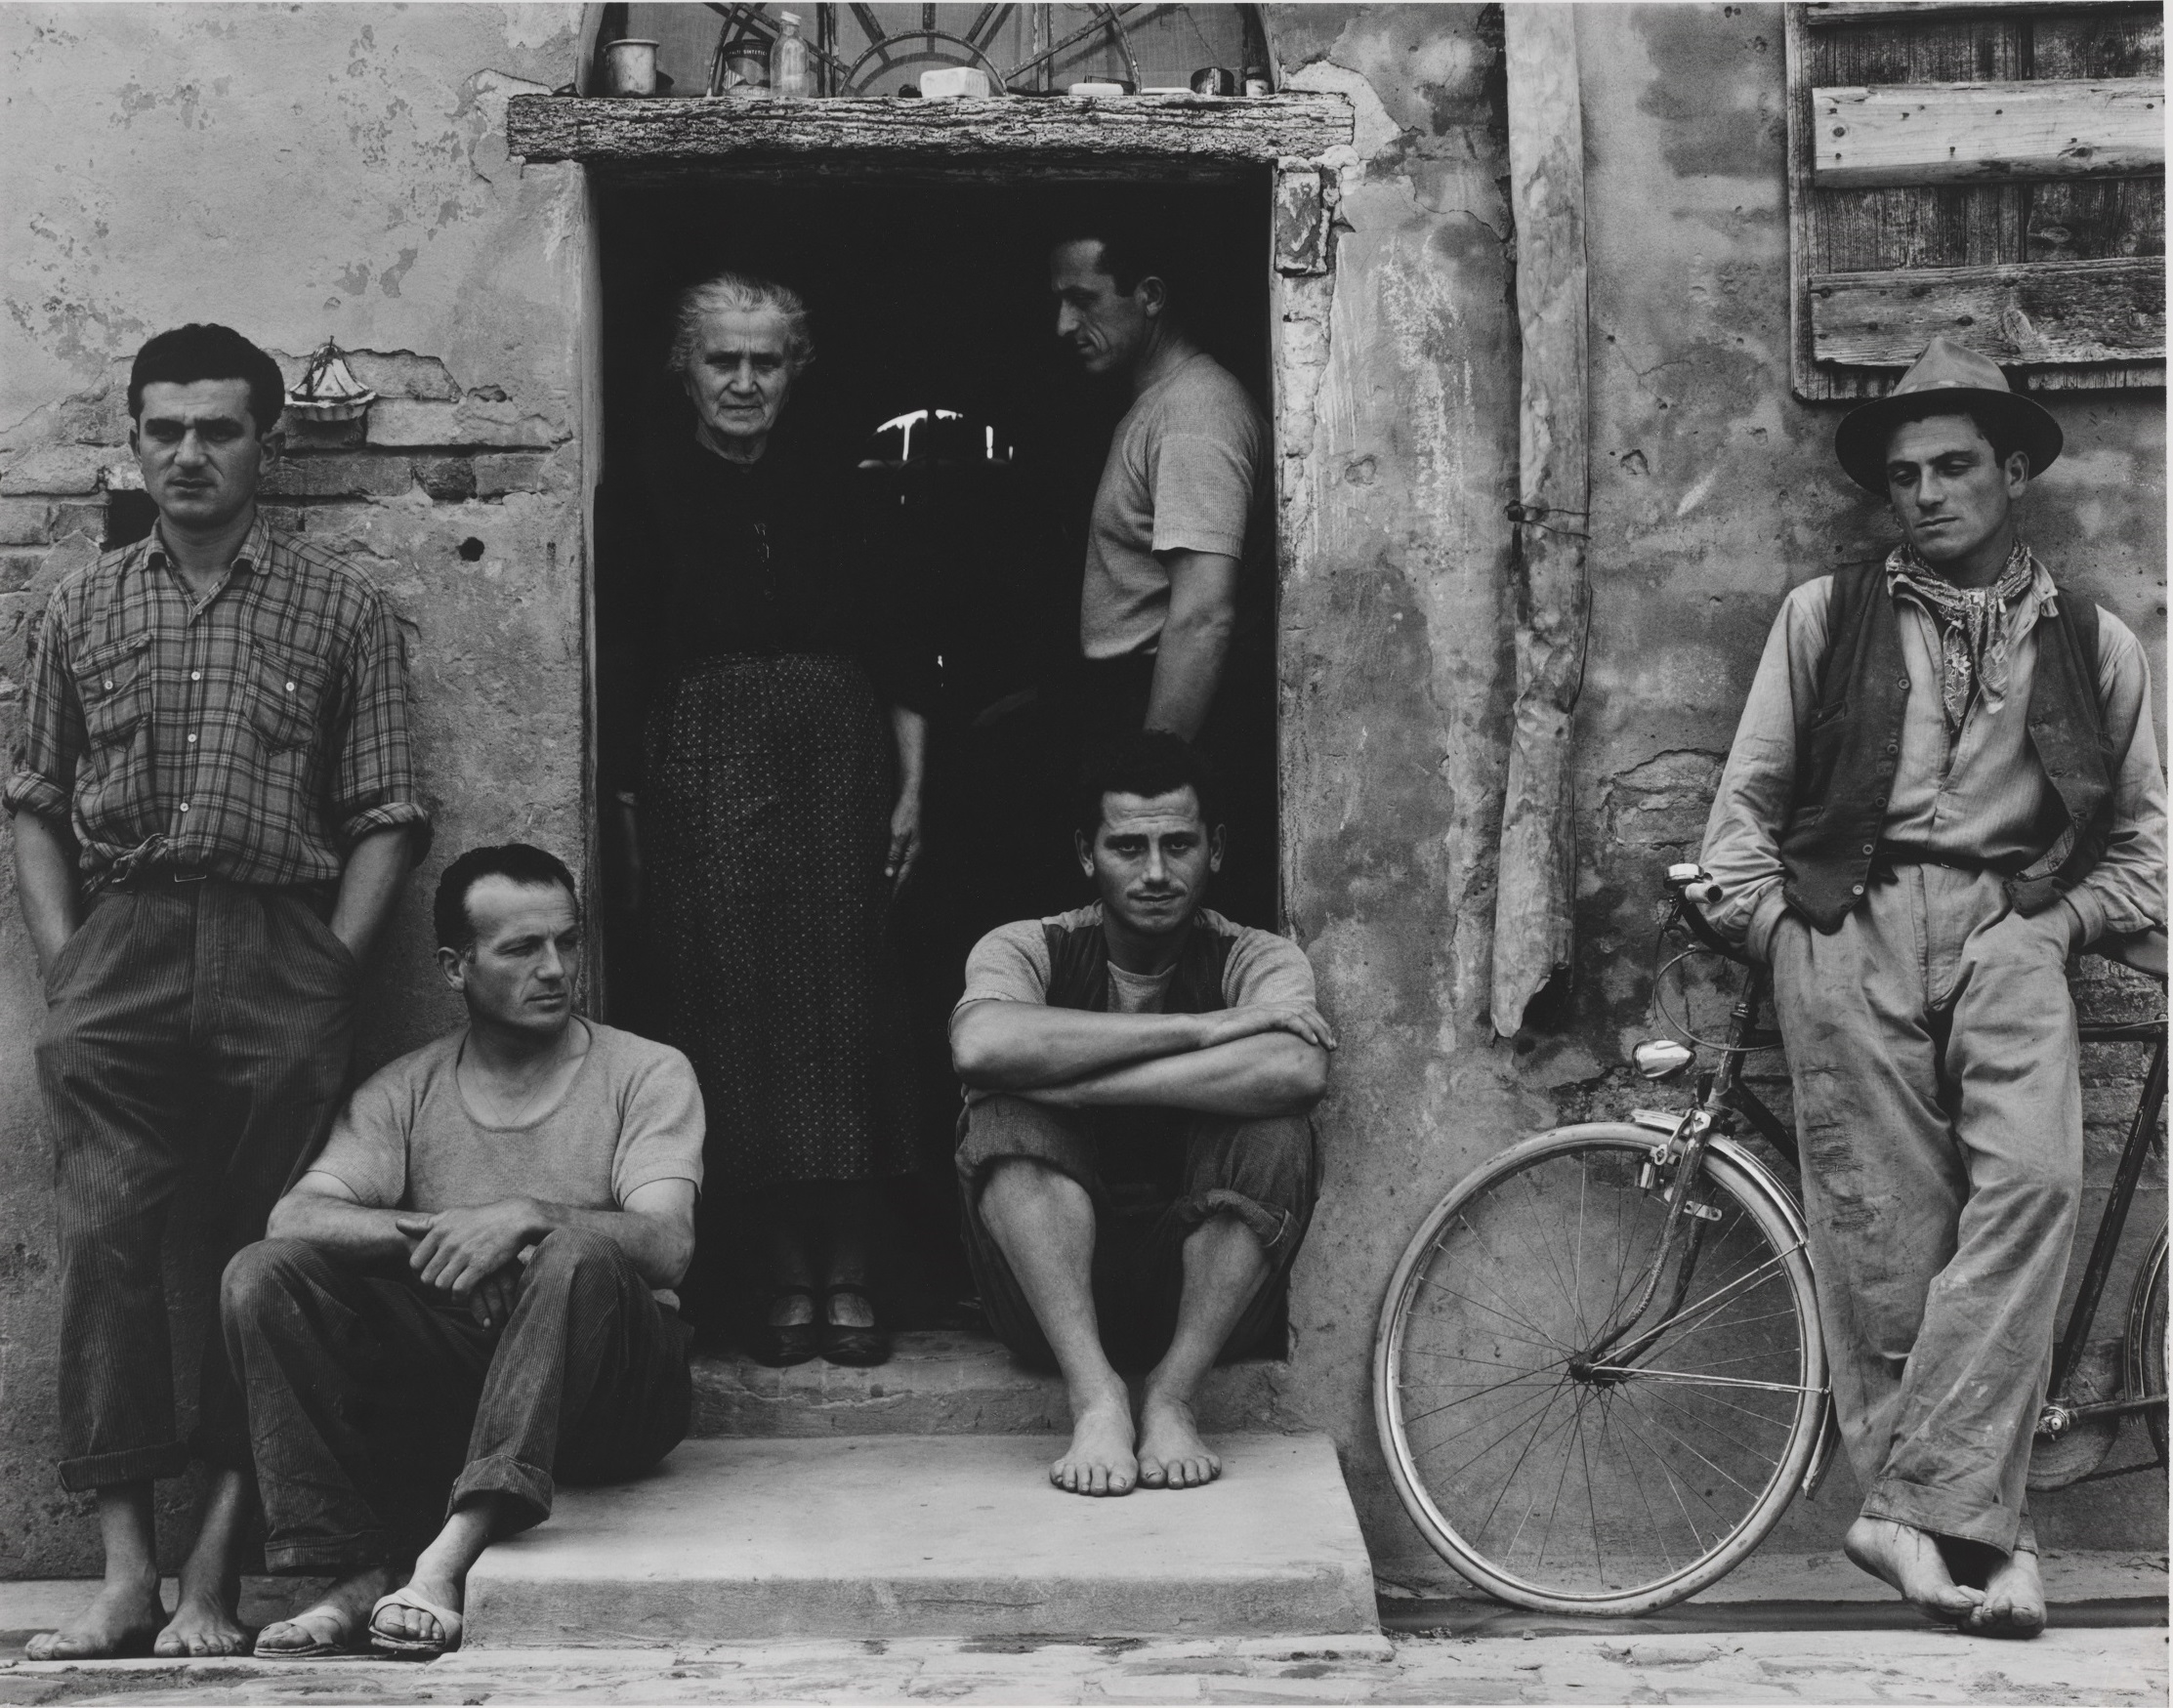 Black-and-white photograph of six Italian men seated outside the door way of a stone building. One of them men has a bicycle.